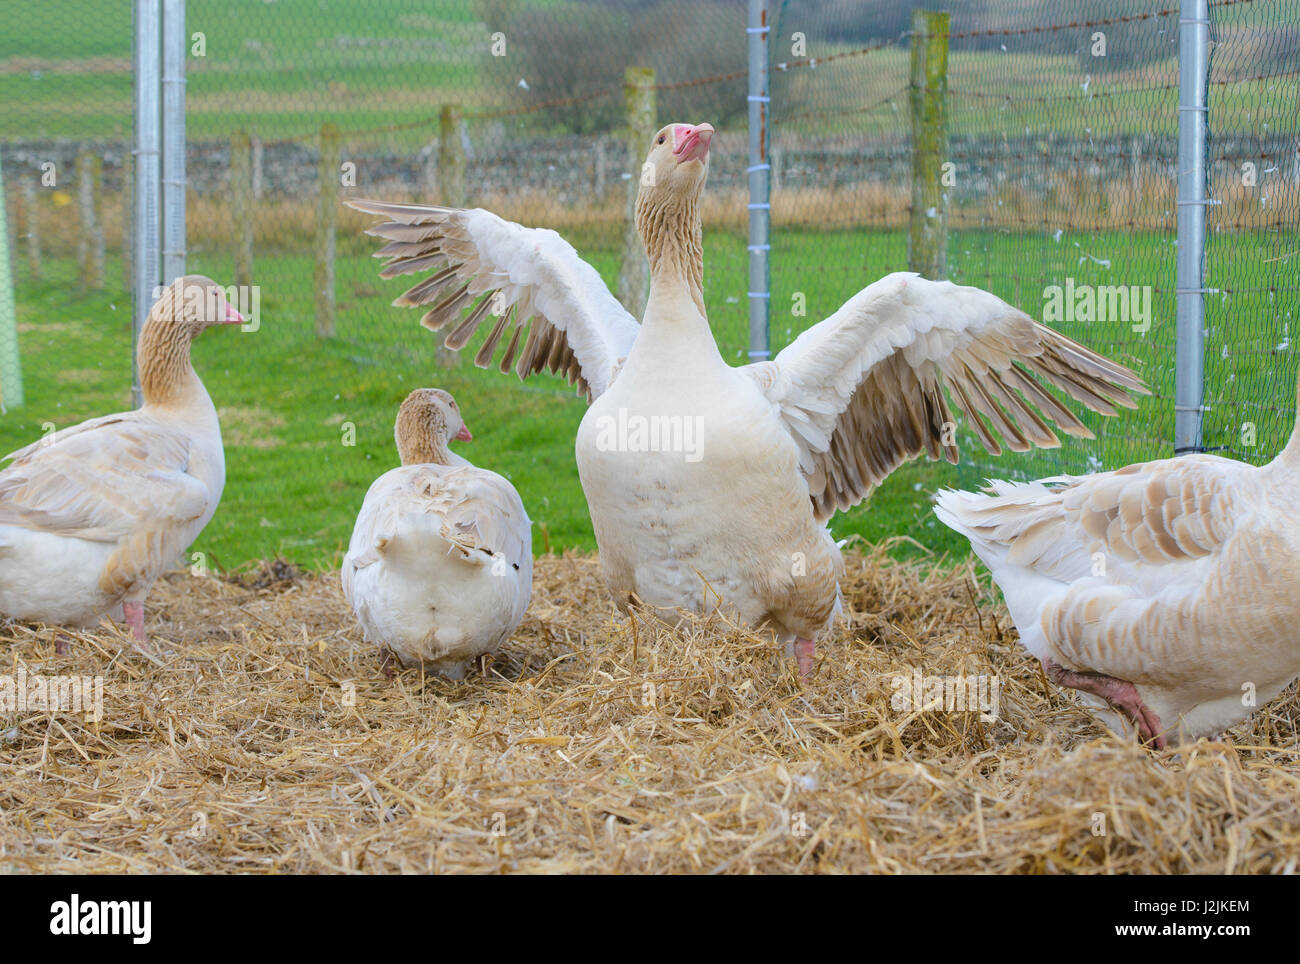 Brecon Buff geese in a pen, Wales. Stock Photo